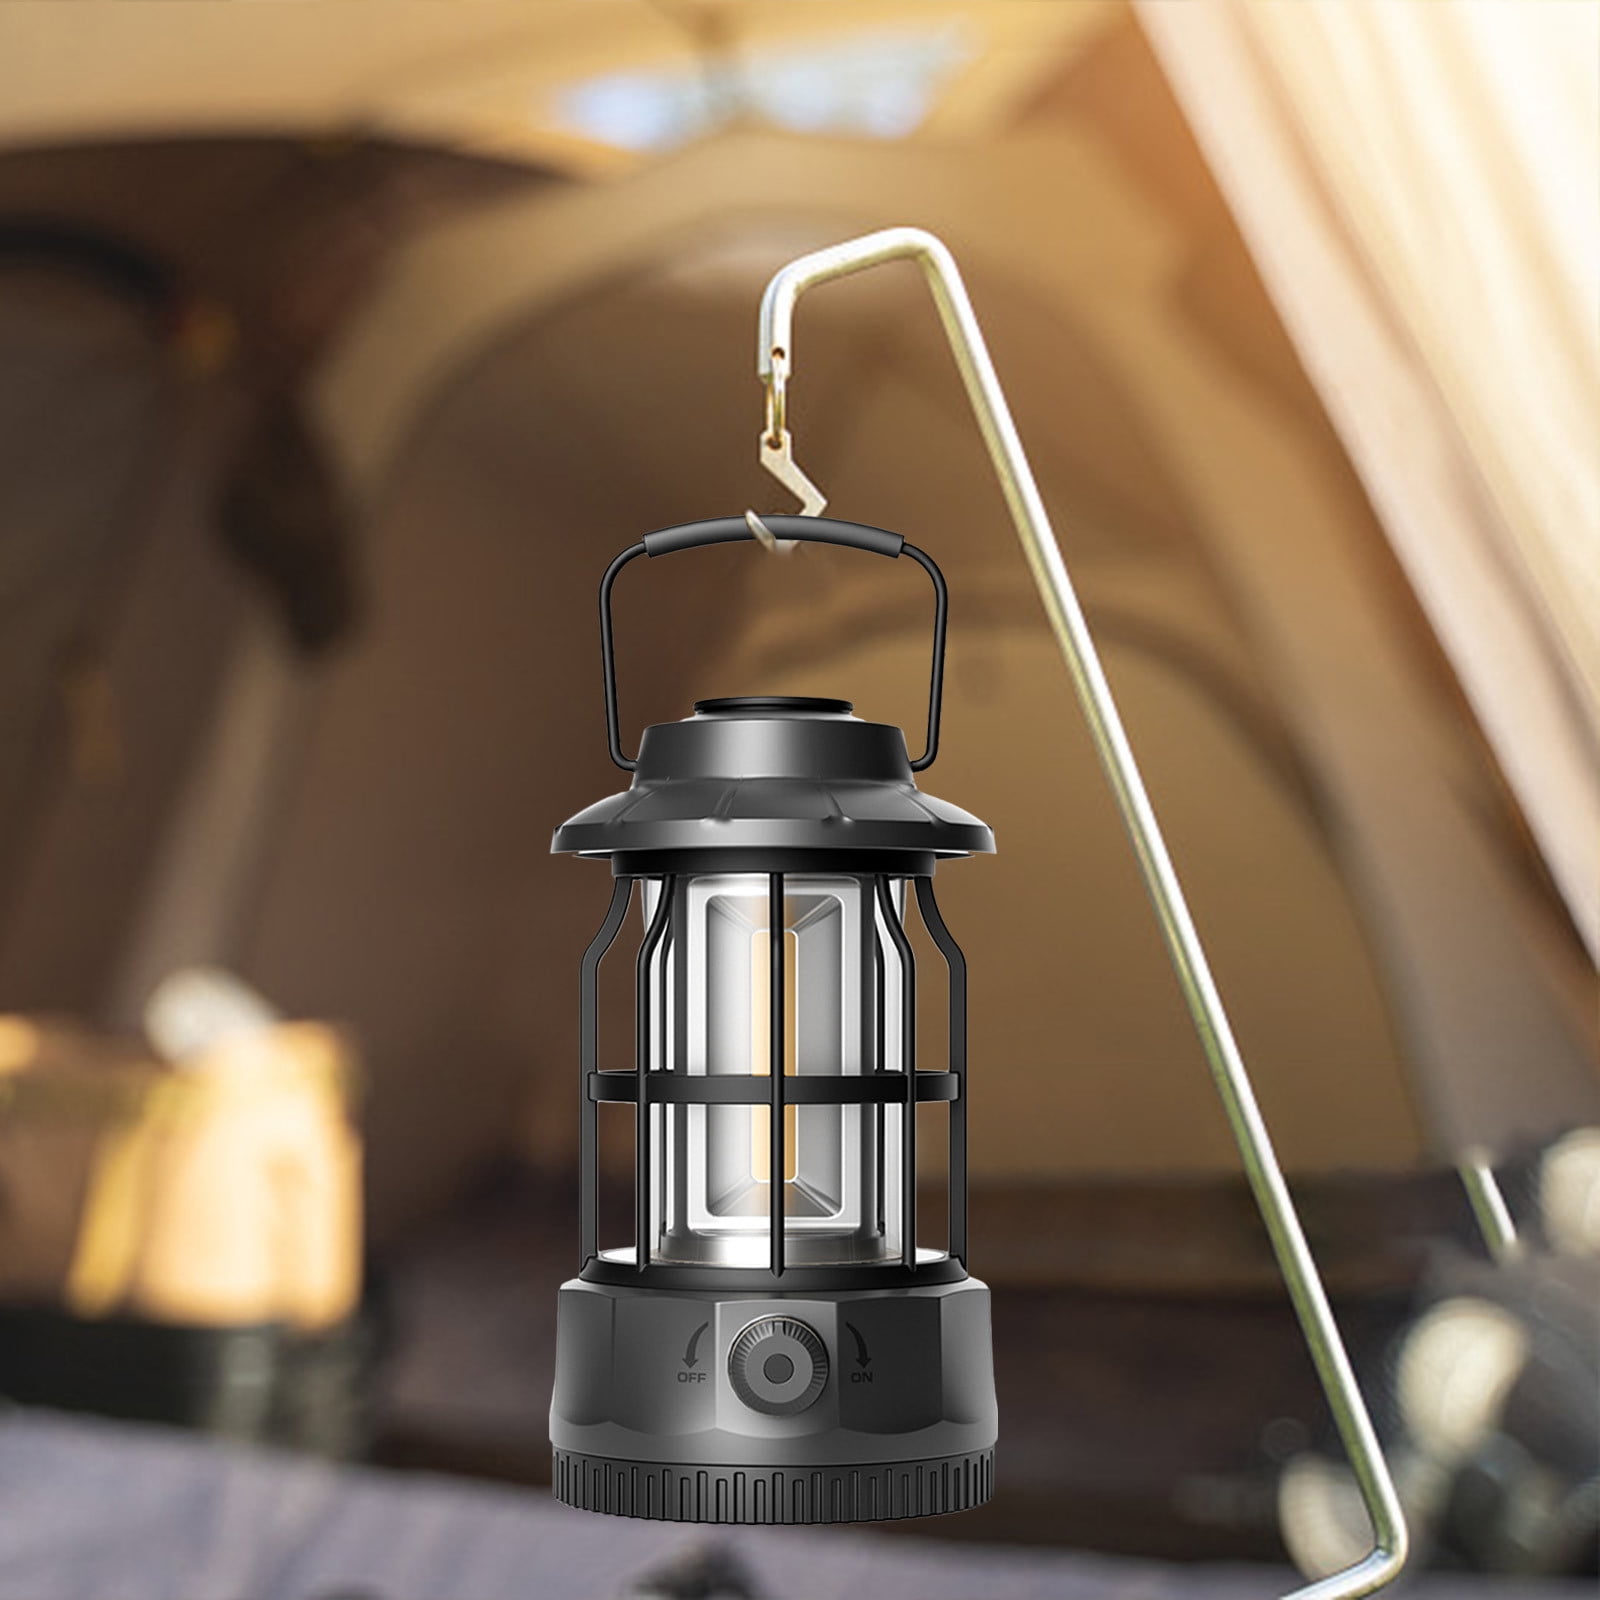 Skpabo LED Camping Lantern,Outdoor Camping Lights,Battery Models Flame Camping Lights Retro Tent Lights Portable Multifunctional Portable Horse Lights